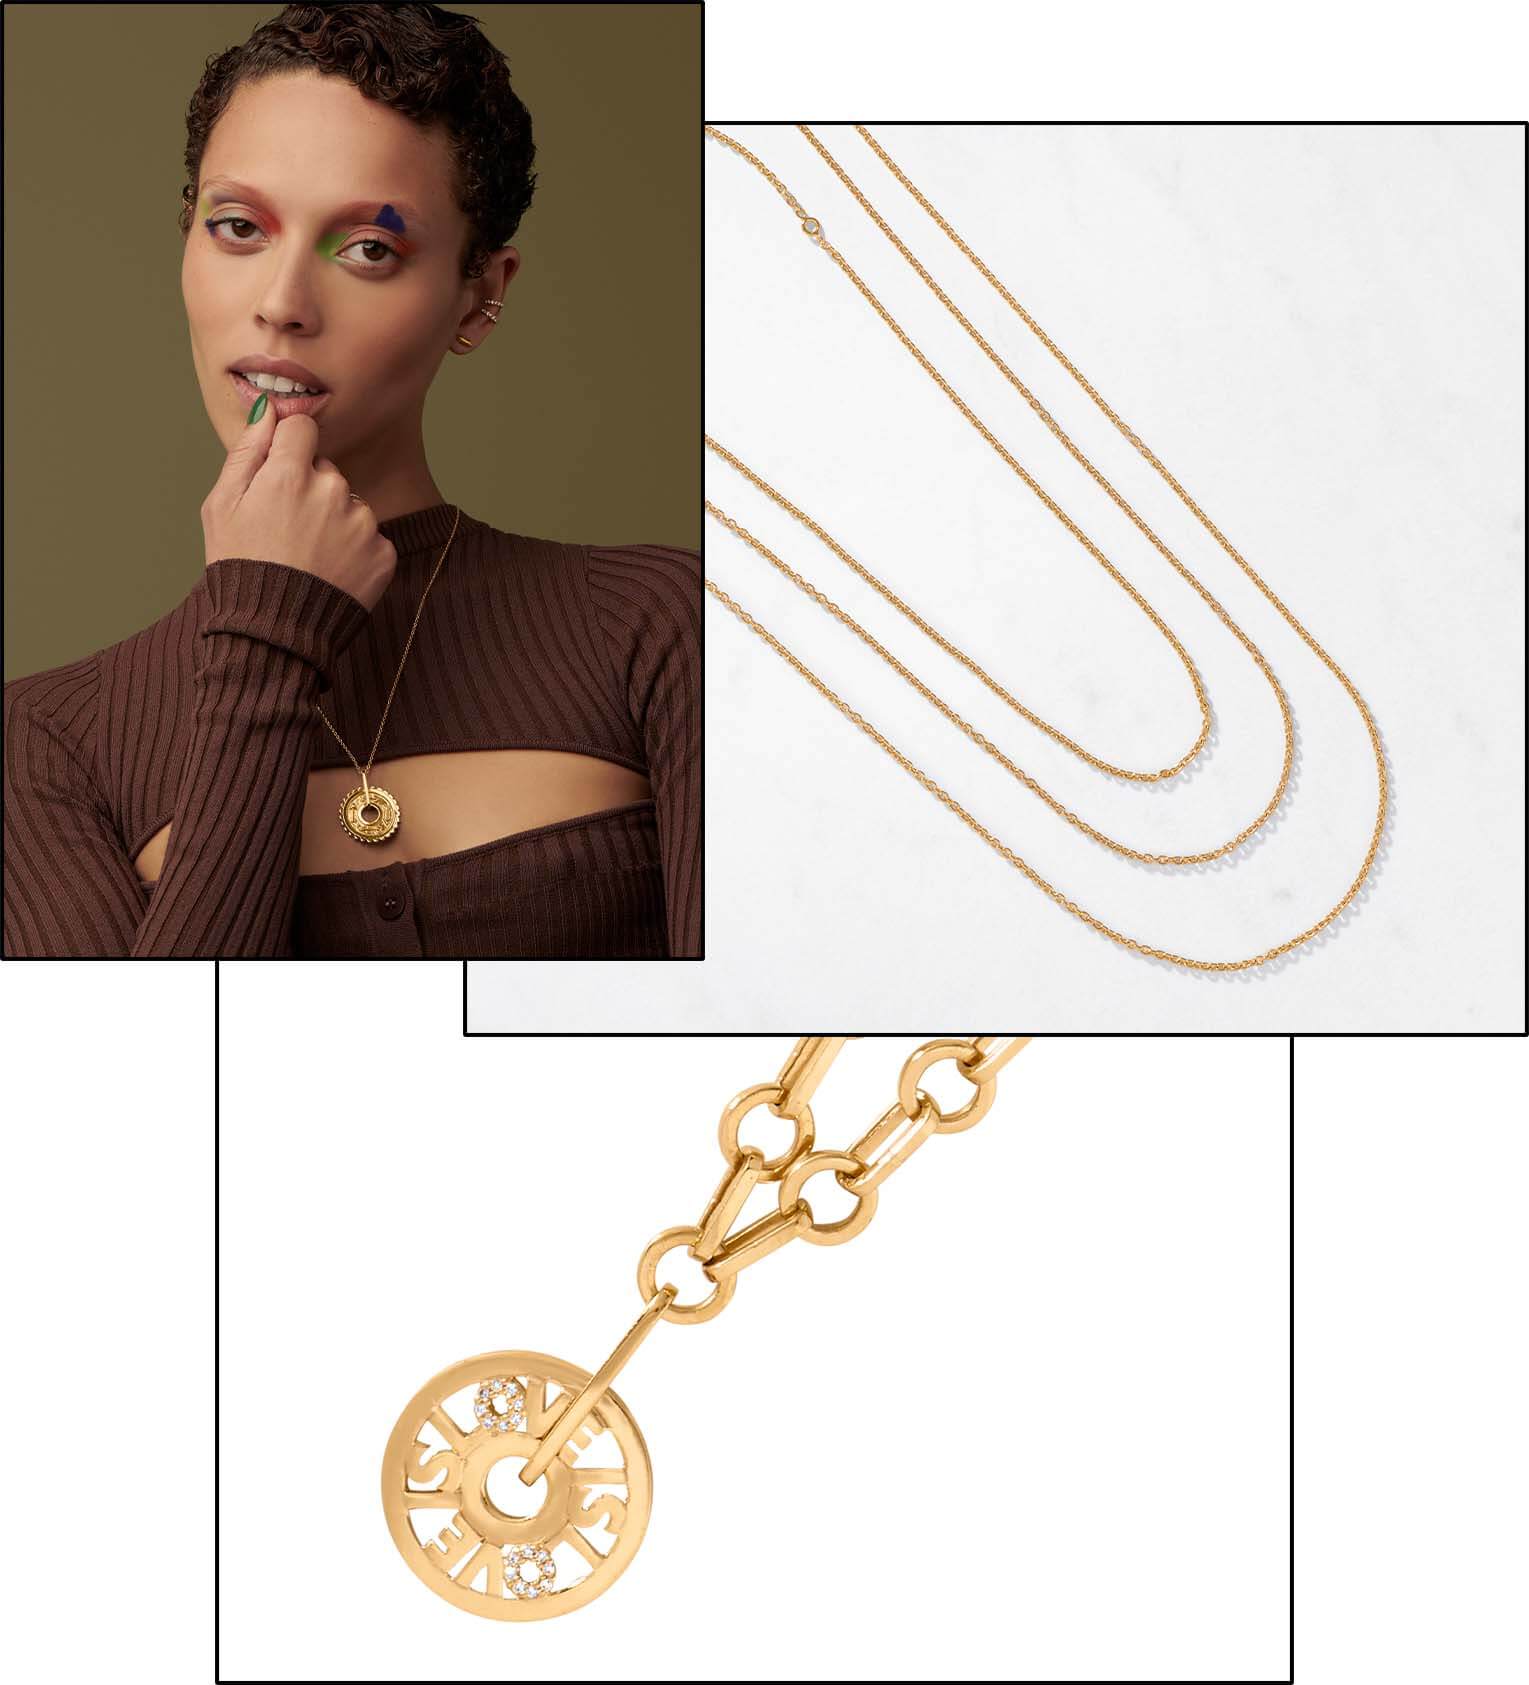 GOLD JEWELRY FOR FALL FASHION TRENDS